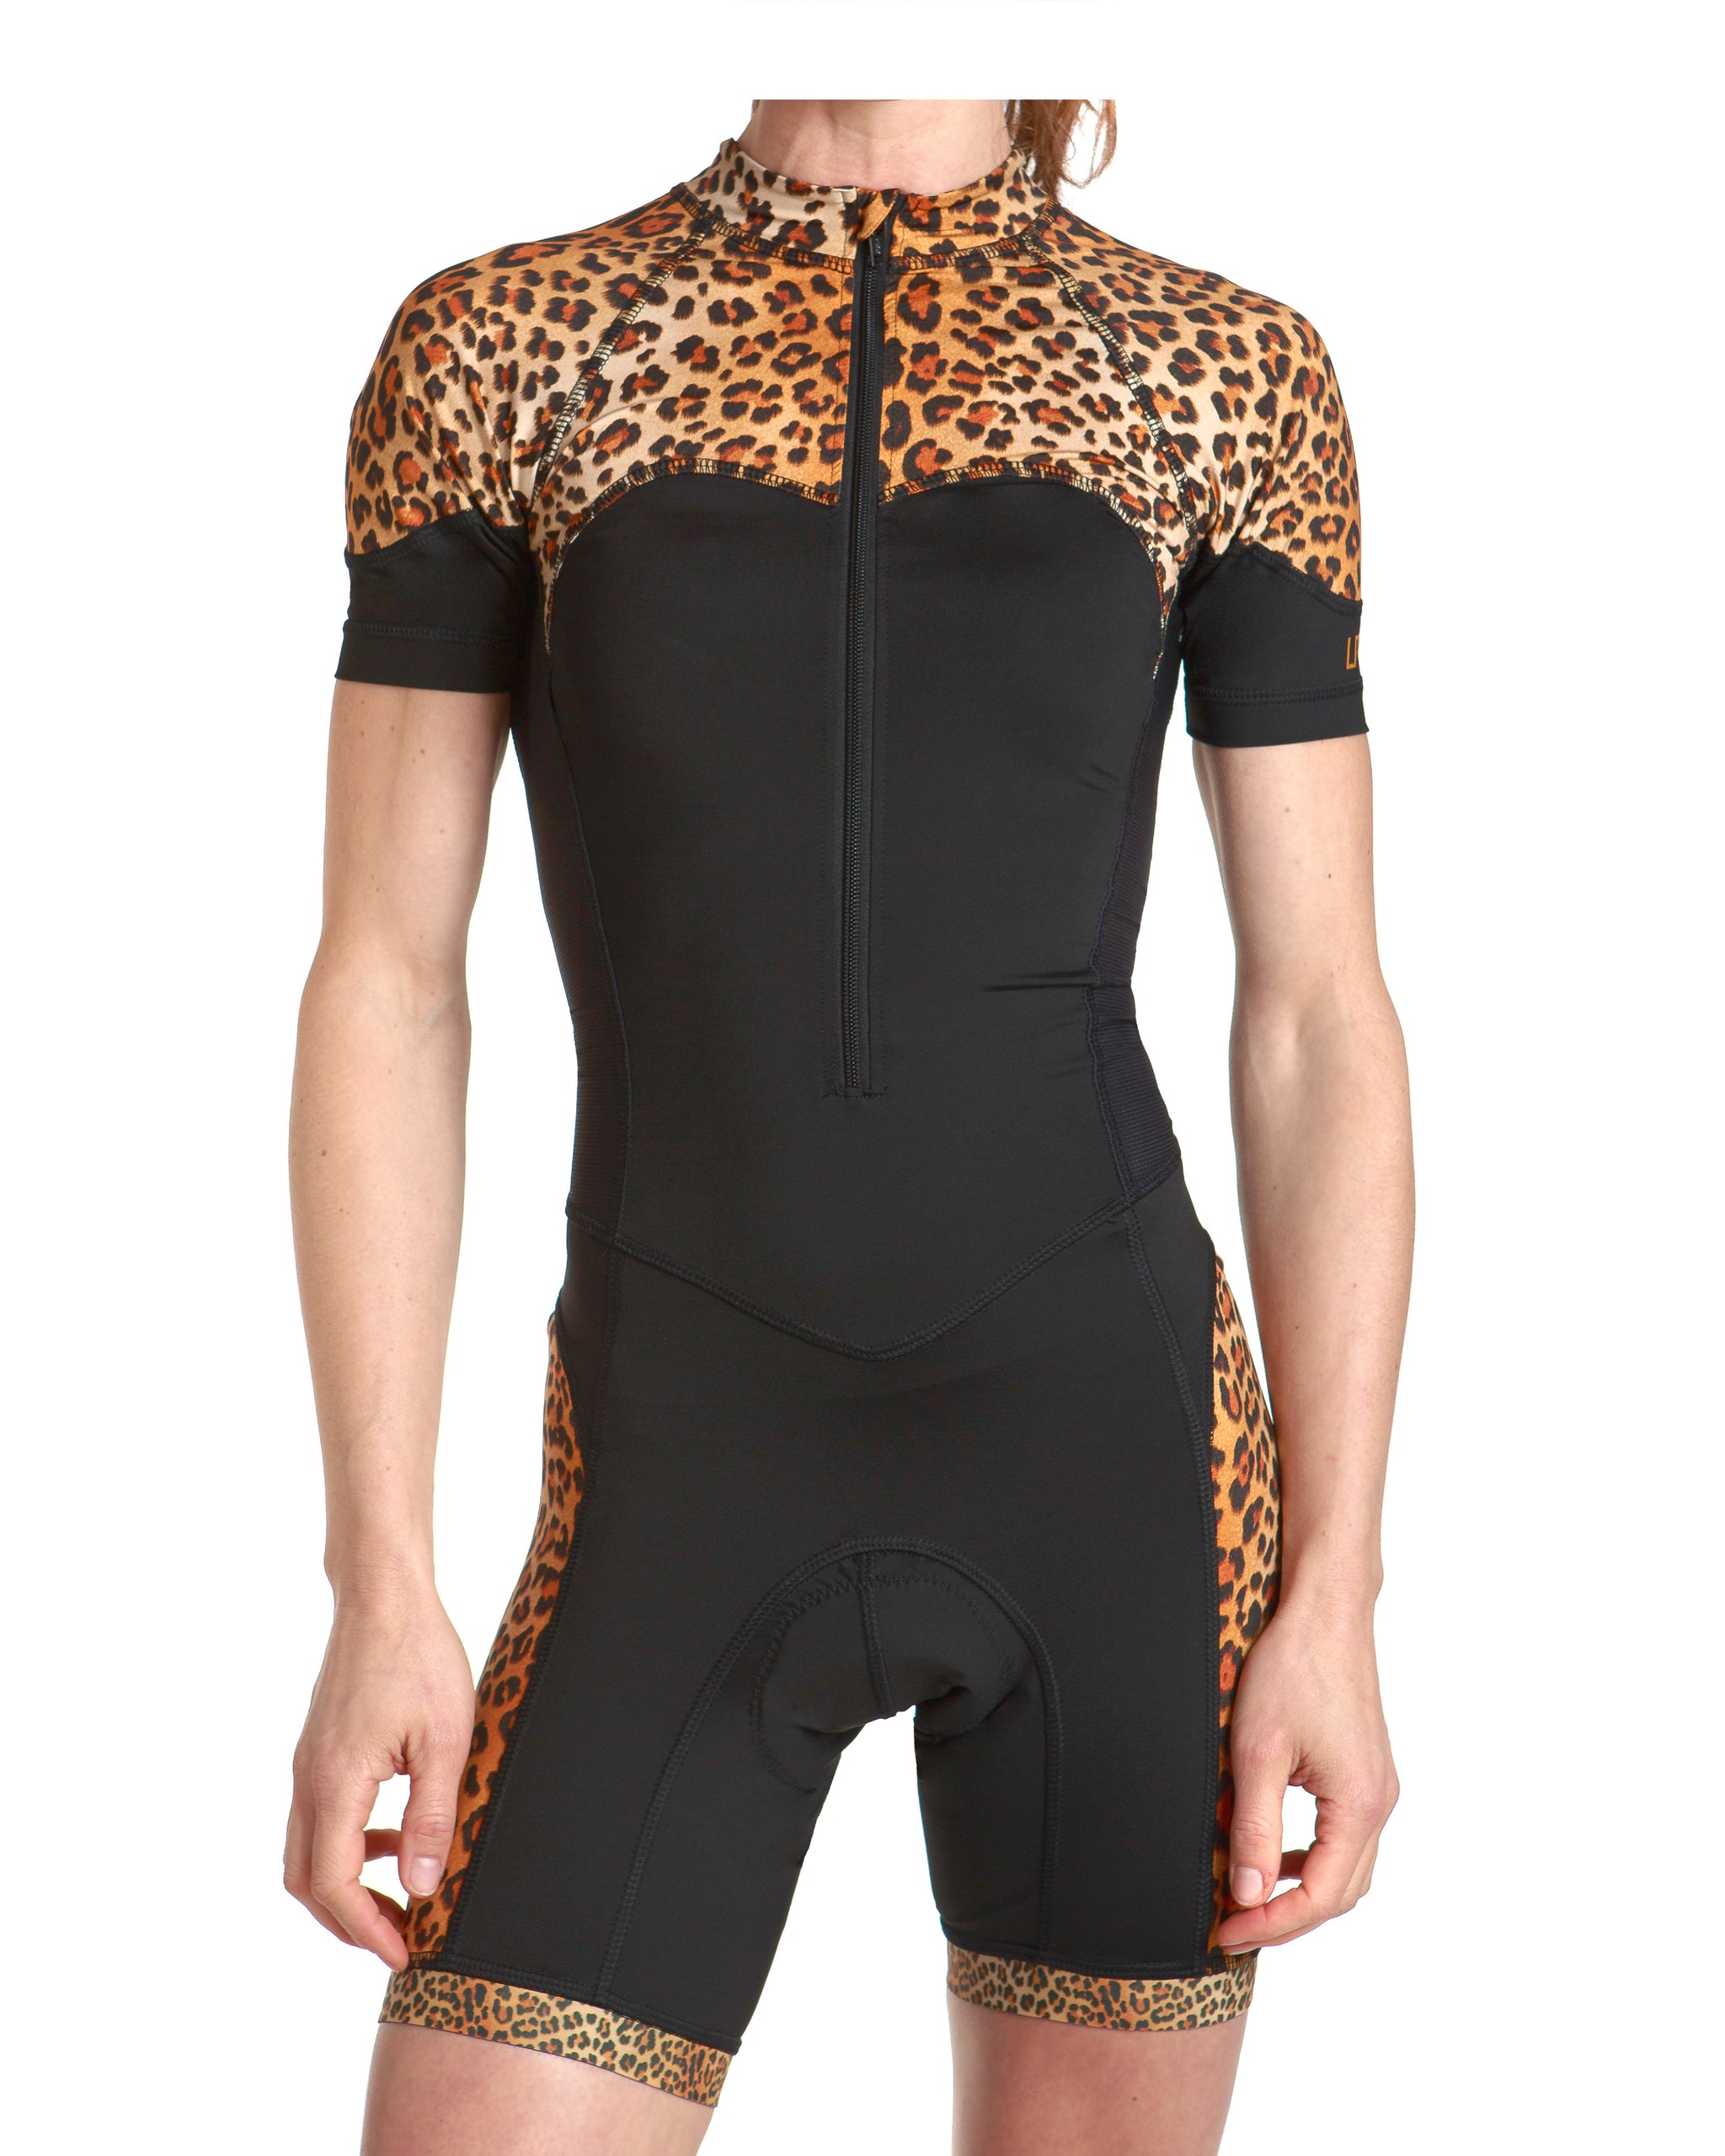 Cycling suit for women - Black and 